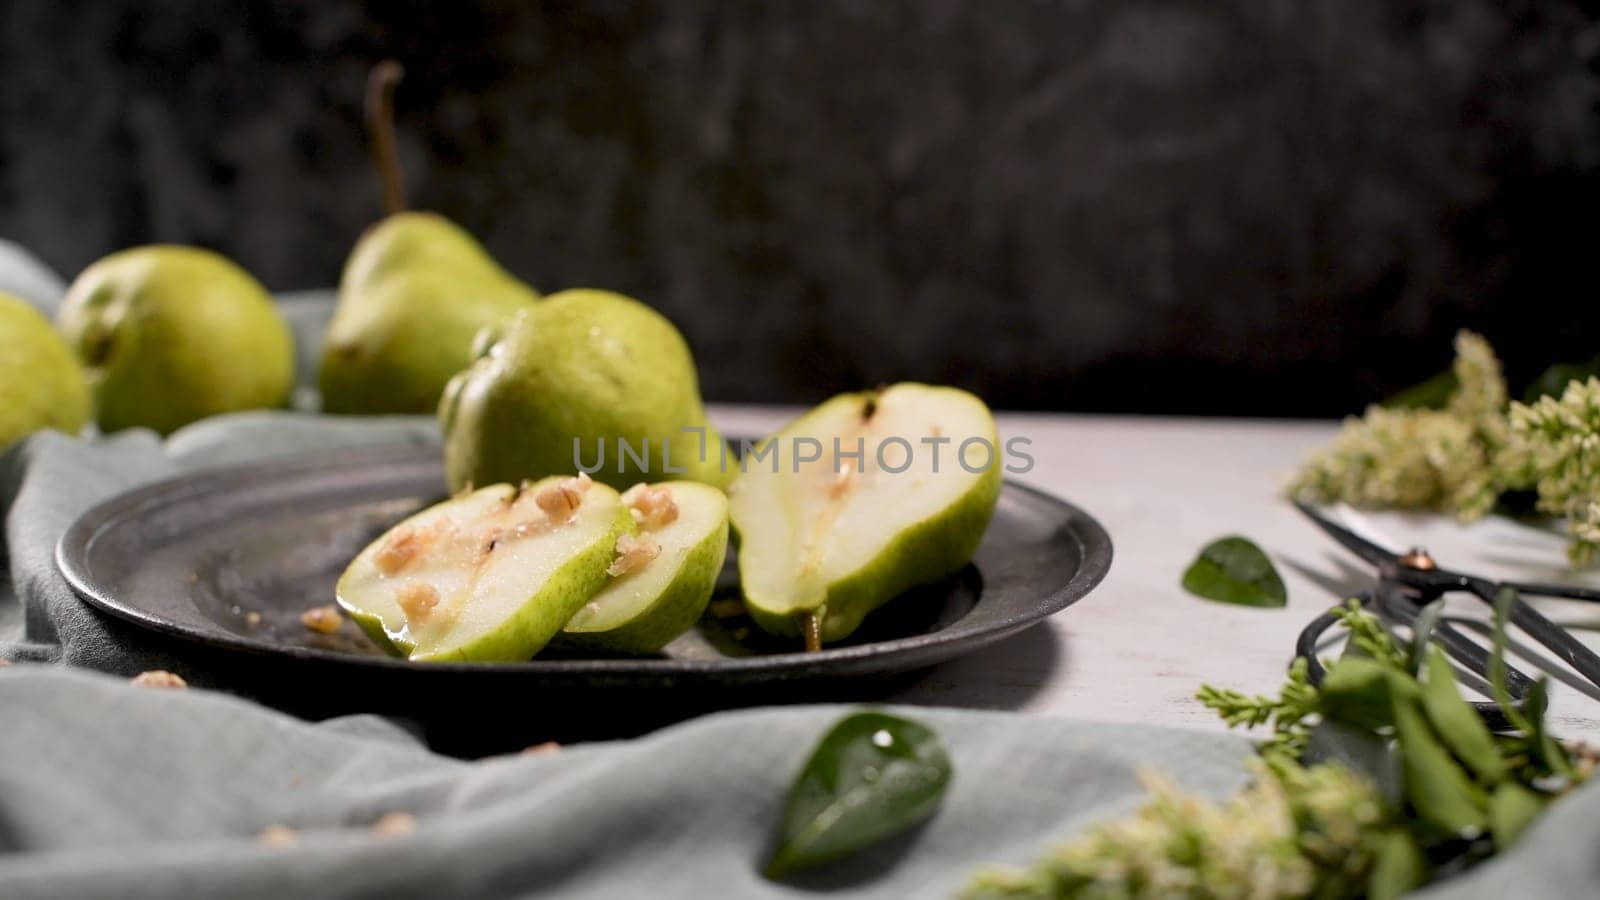 Metal plate with delicious ripe pears on table.